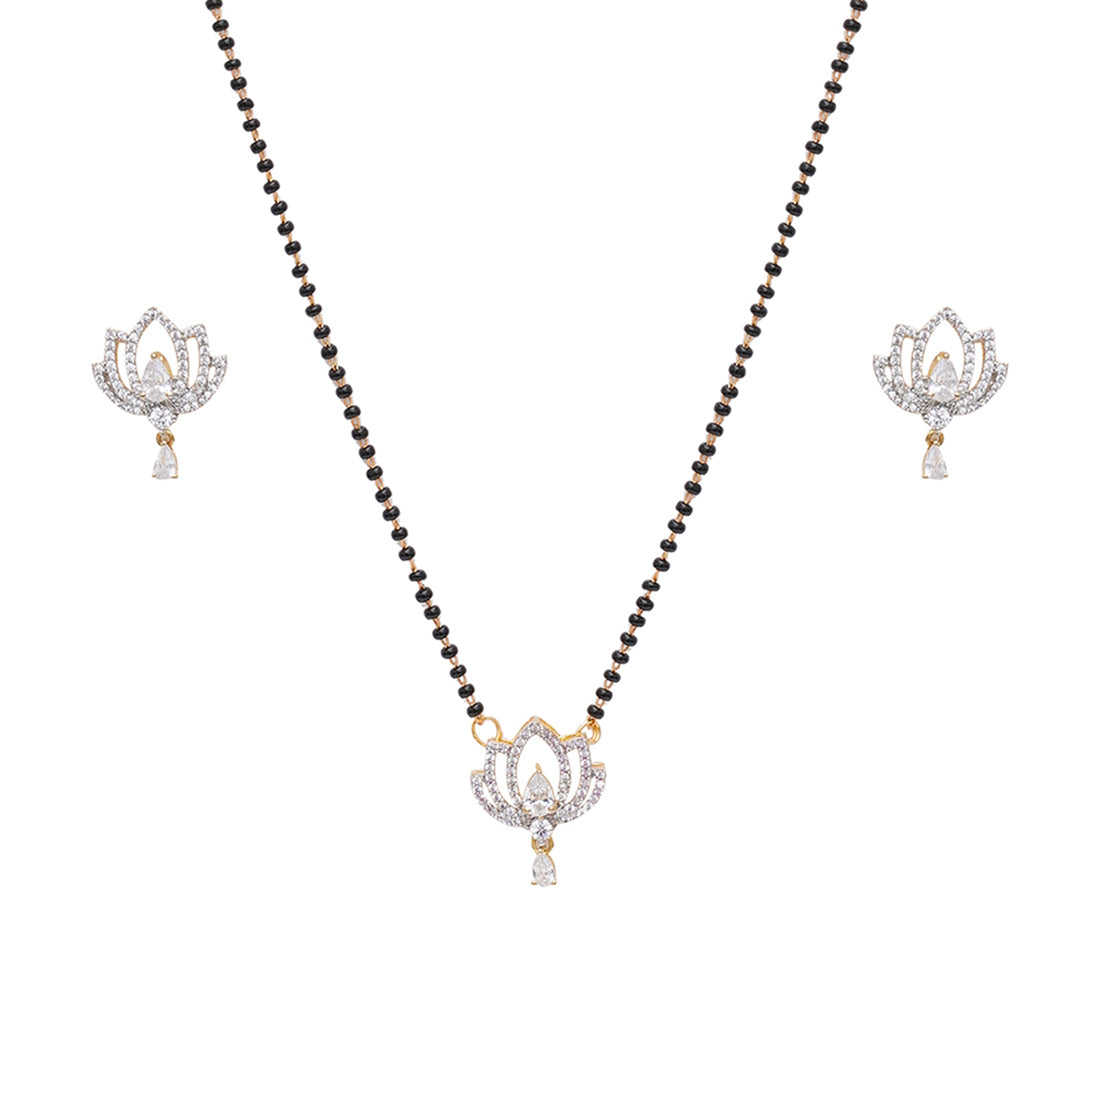 Gold-Plated Black Beaded Mangalsutra Necklace Set